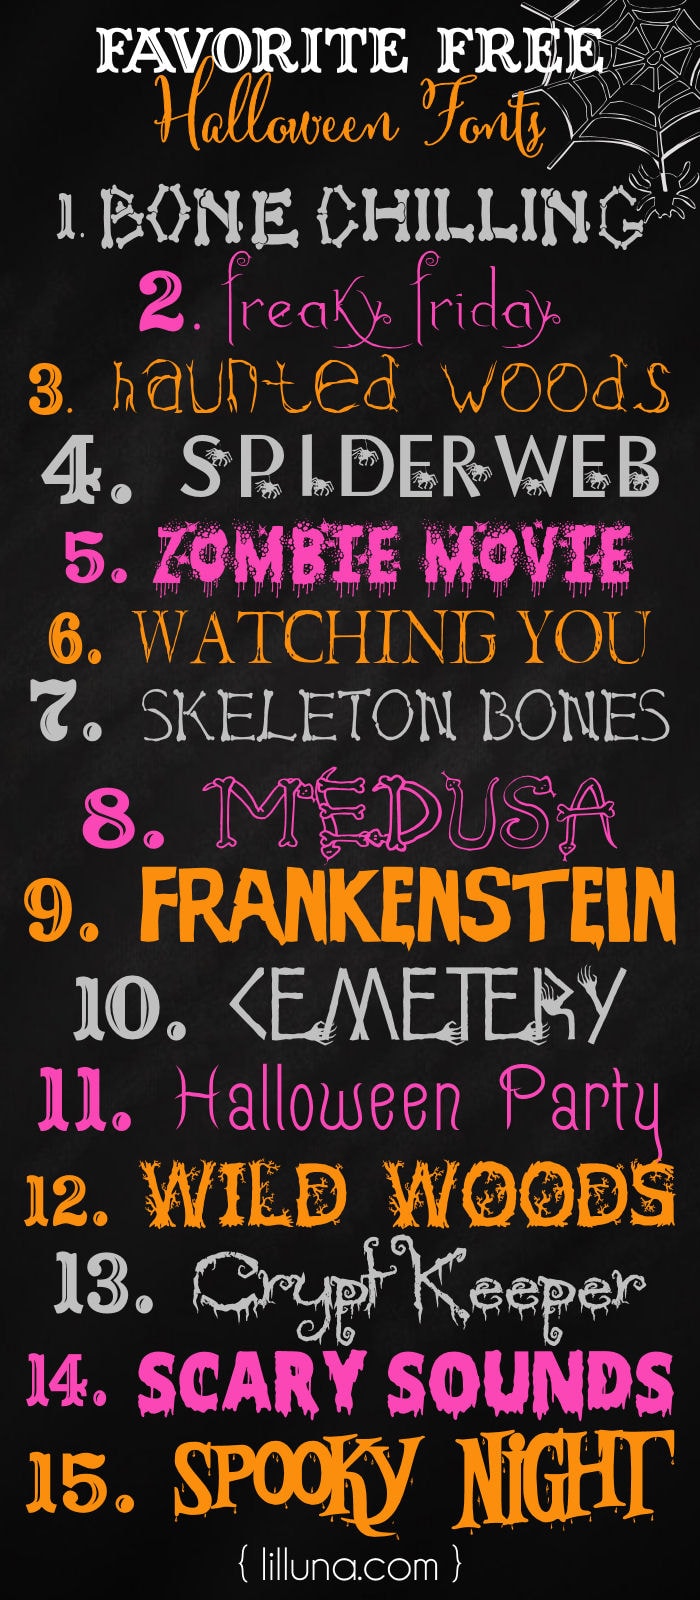 FREE Halloween Fonts - so many great ones to use in your own creations on { lilluna